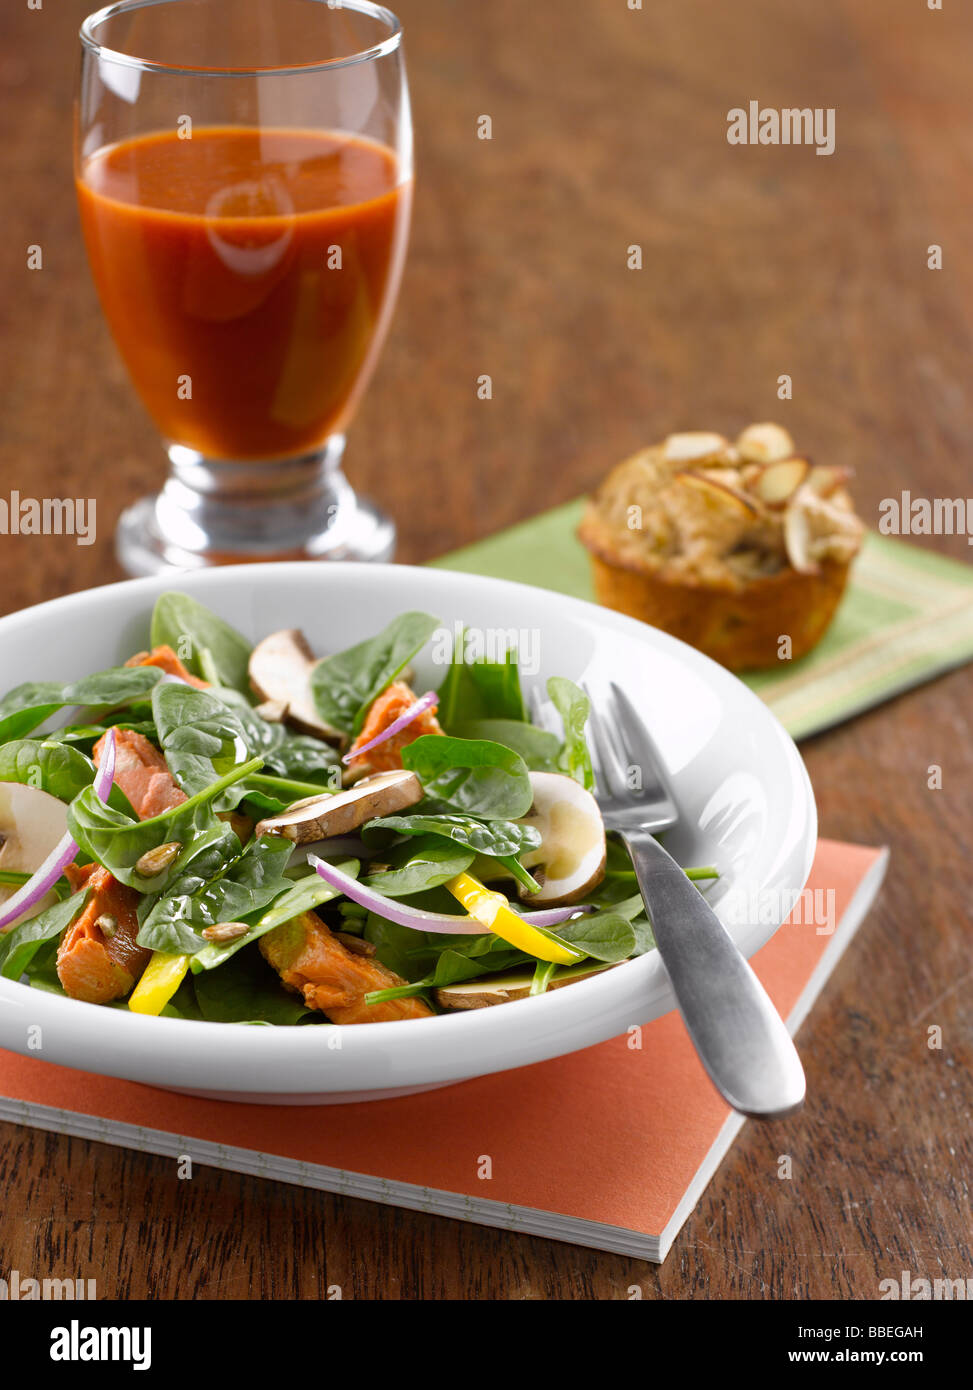 Spinach Salad With Salmon and Mushrooms, Almond Muffin, and Glass of Tomato Juice Stock Photo